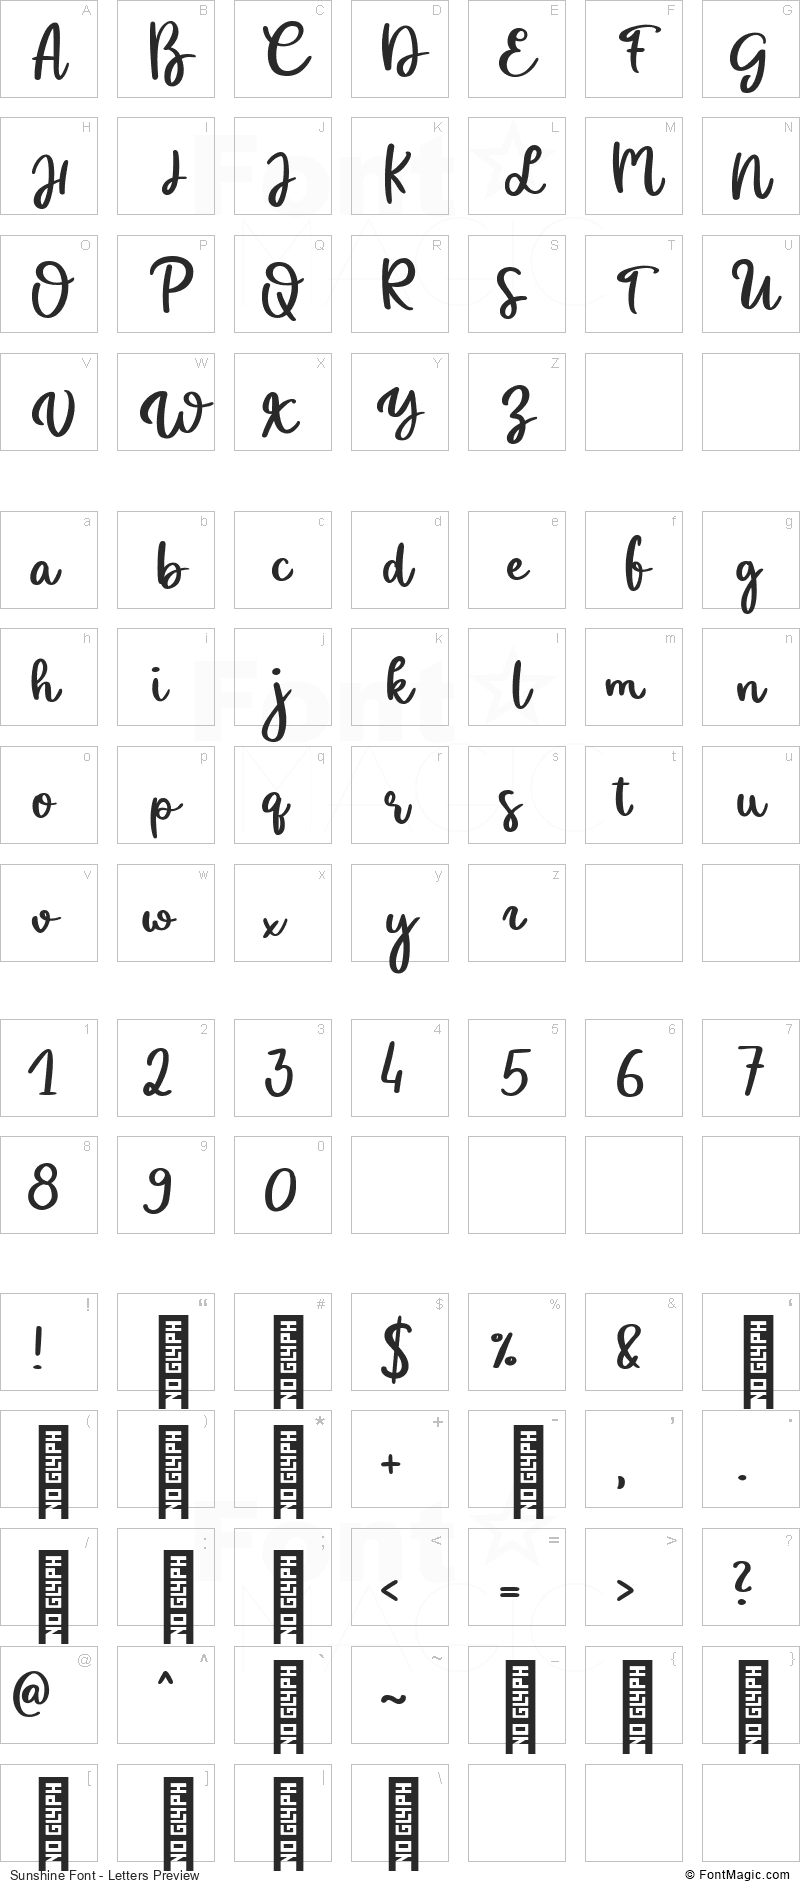 Sunshine Font - All Latters Preview Chart